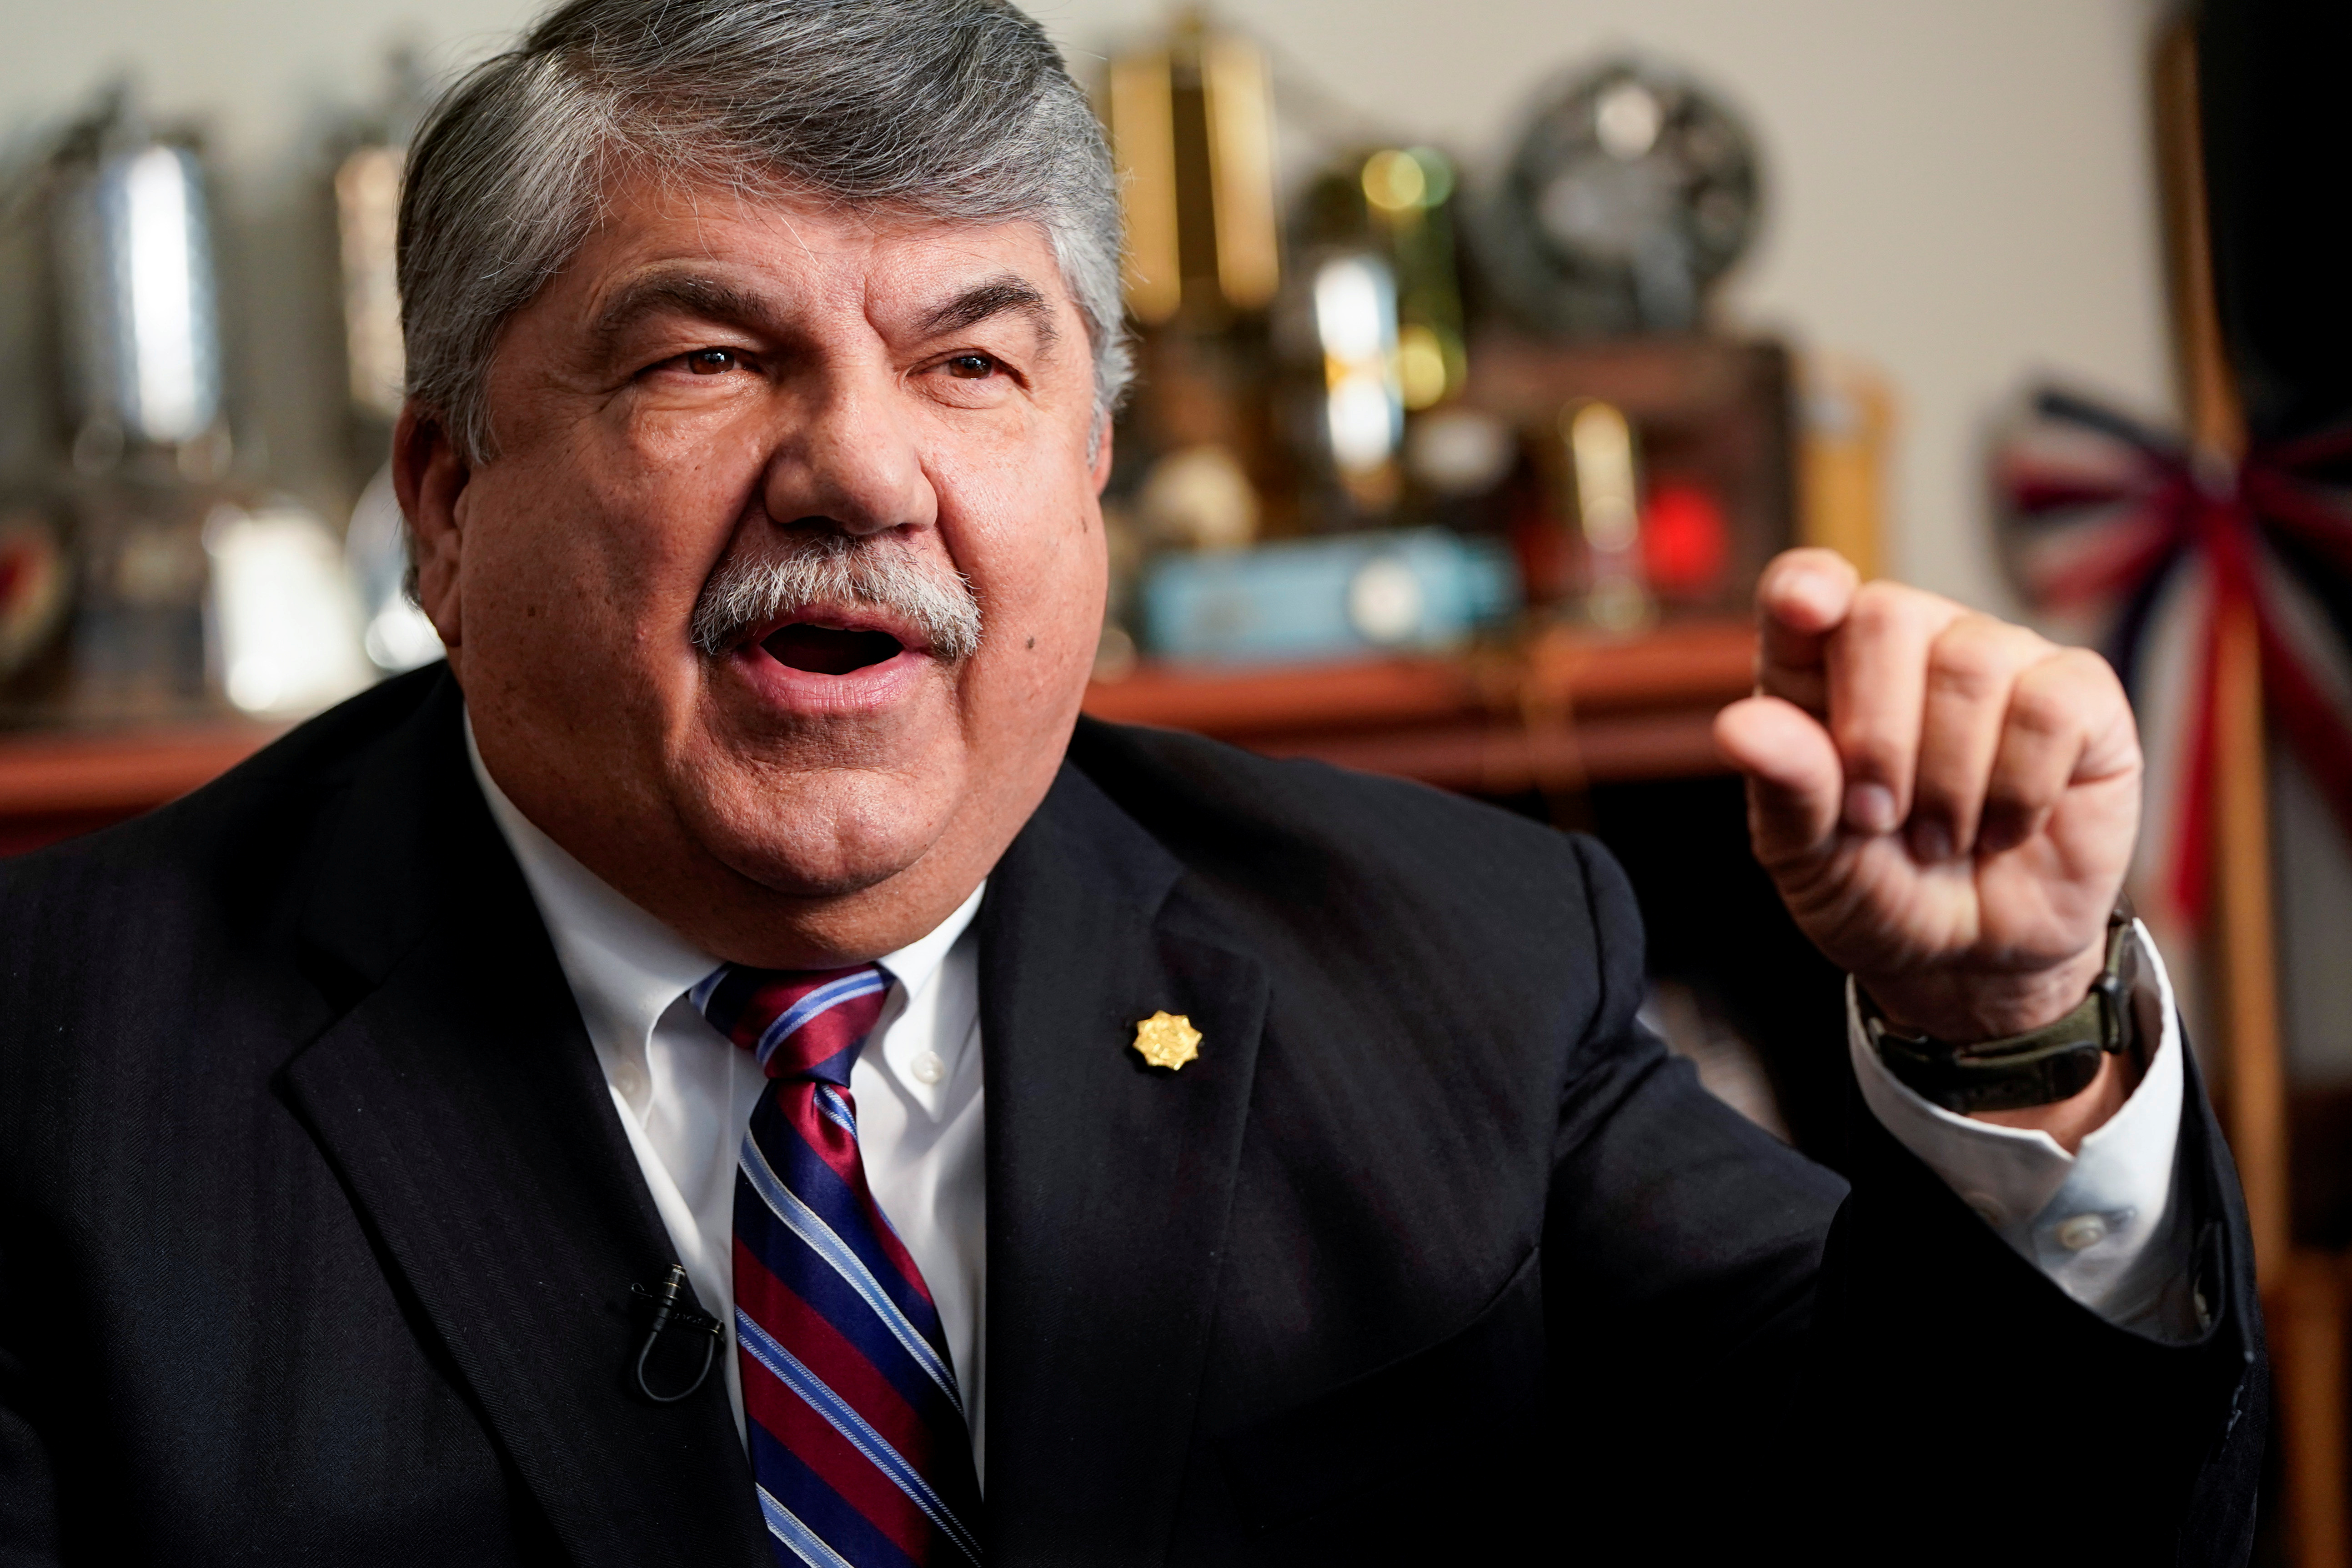 FILE PHOTO: President of the AFL-CIO Richard Trumka speaks about his role in securing labor protections in the USMCA trade agreement during an interview with Reuters in Washington, U.S., December 19, 2019.      REUTERS/Joshua Roberts/File Photo